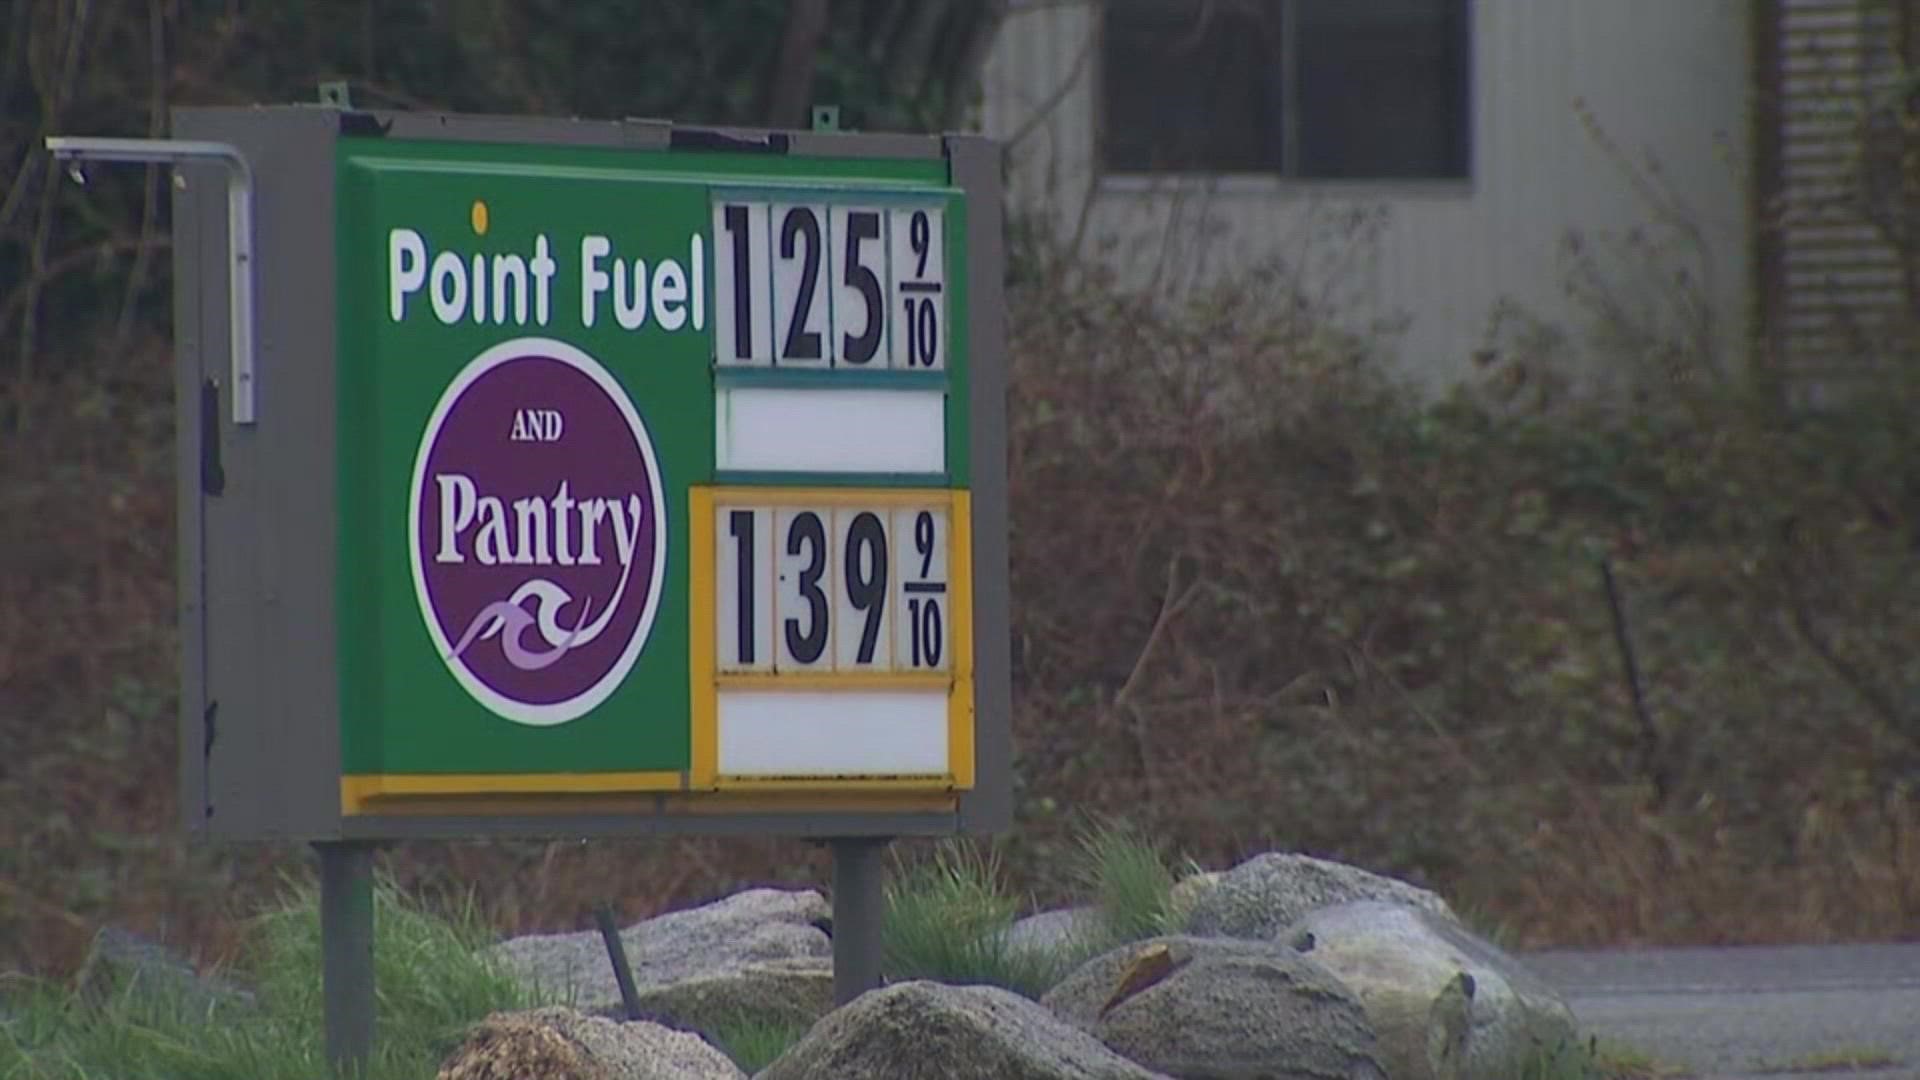 Many in the town, which was isolated by the pandemic for nearly two years, are excited to see Canadians visiting once again to take advantage of lower gas prices.